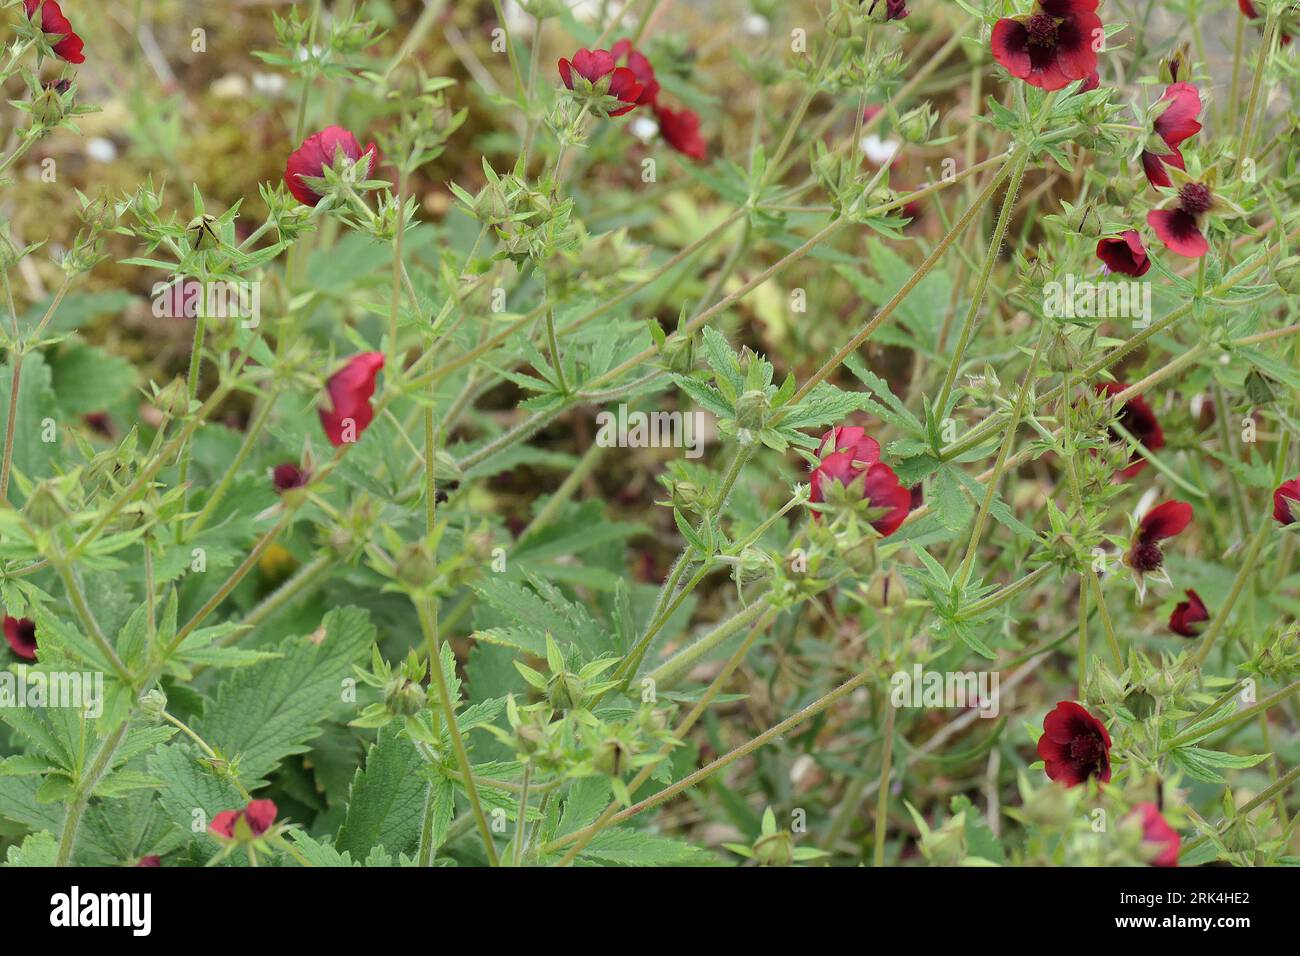 Closeup of the red flowers and evergreen leaves of the summer flowering herbaceous garden perennial potentilla thurberi monarch's velvet Scarlet. Stock Photo